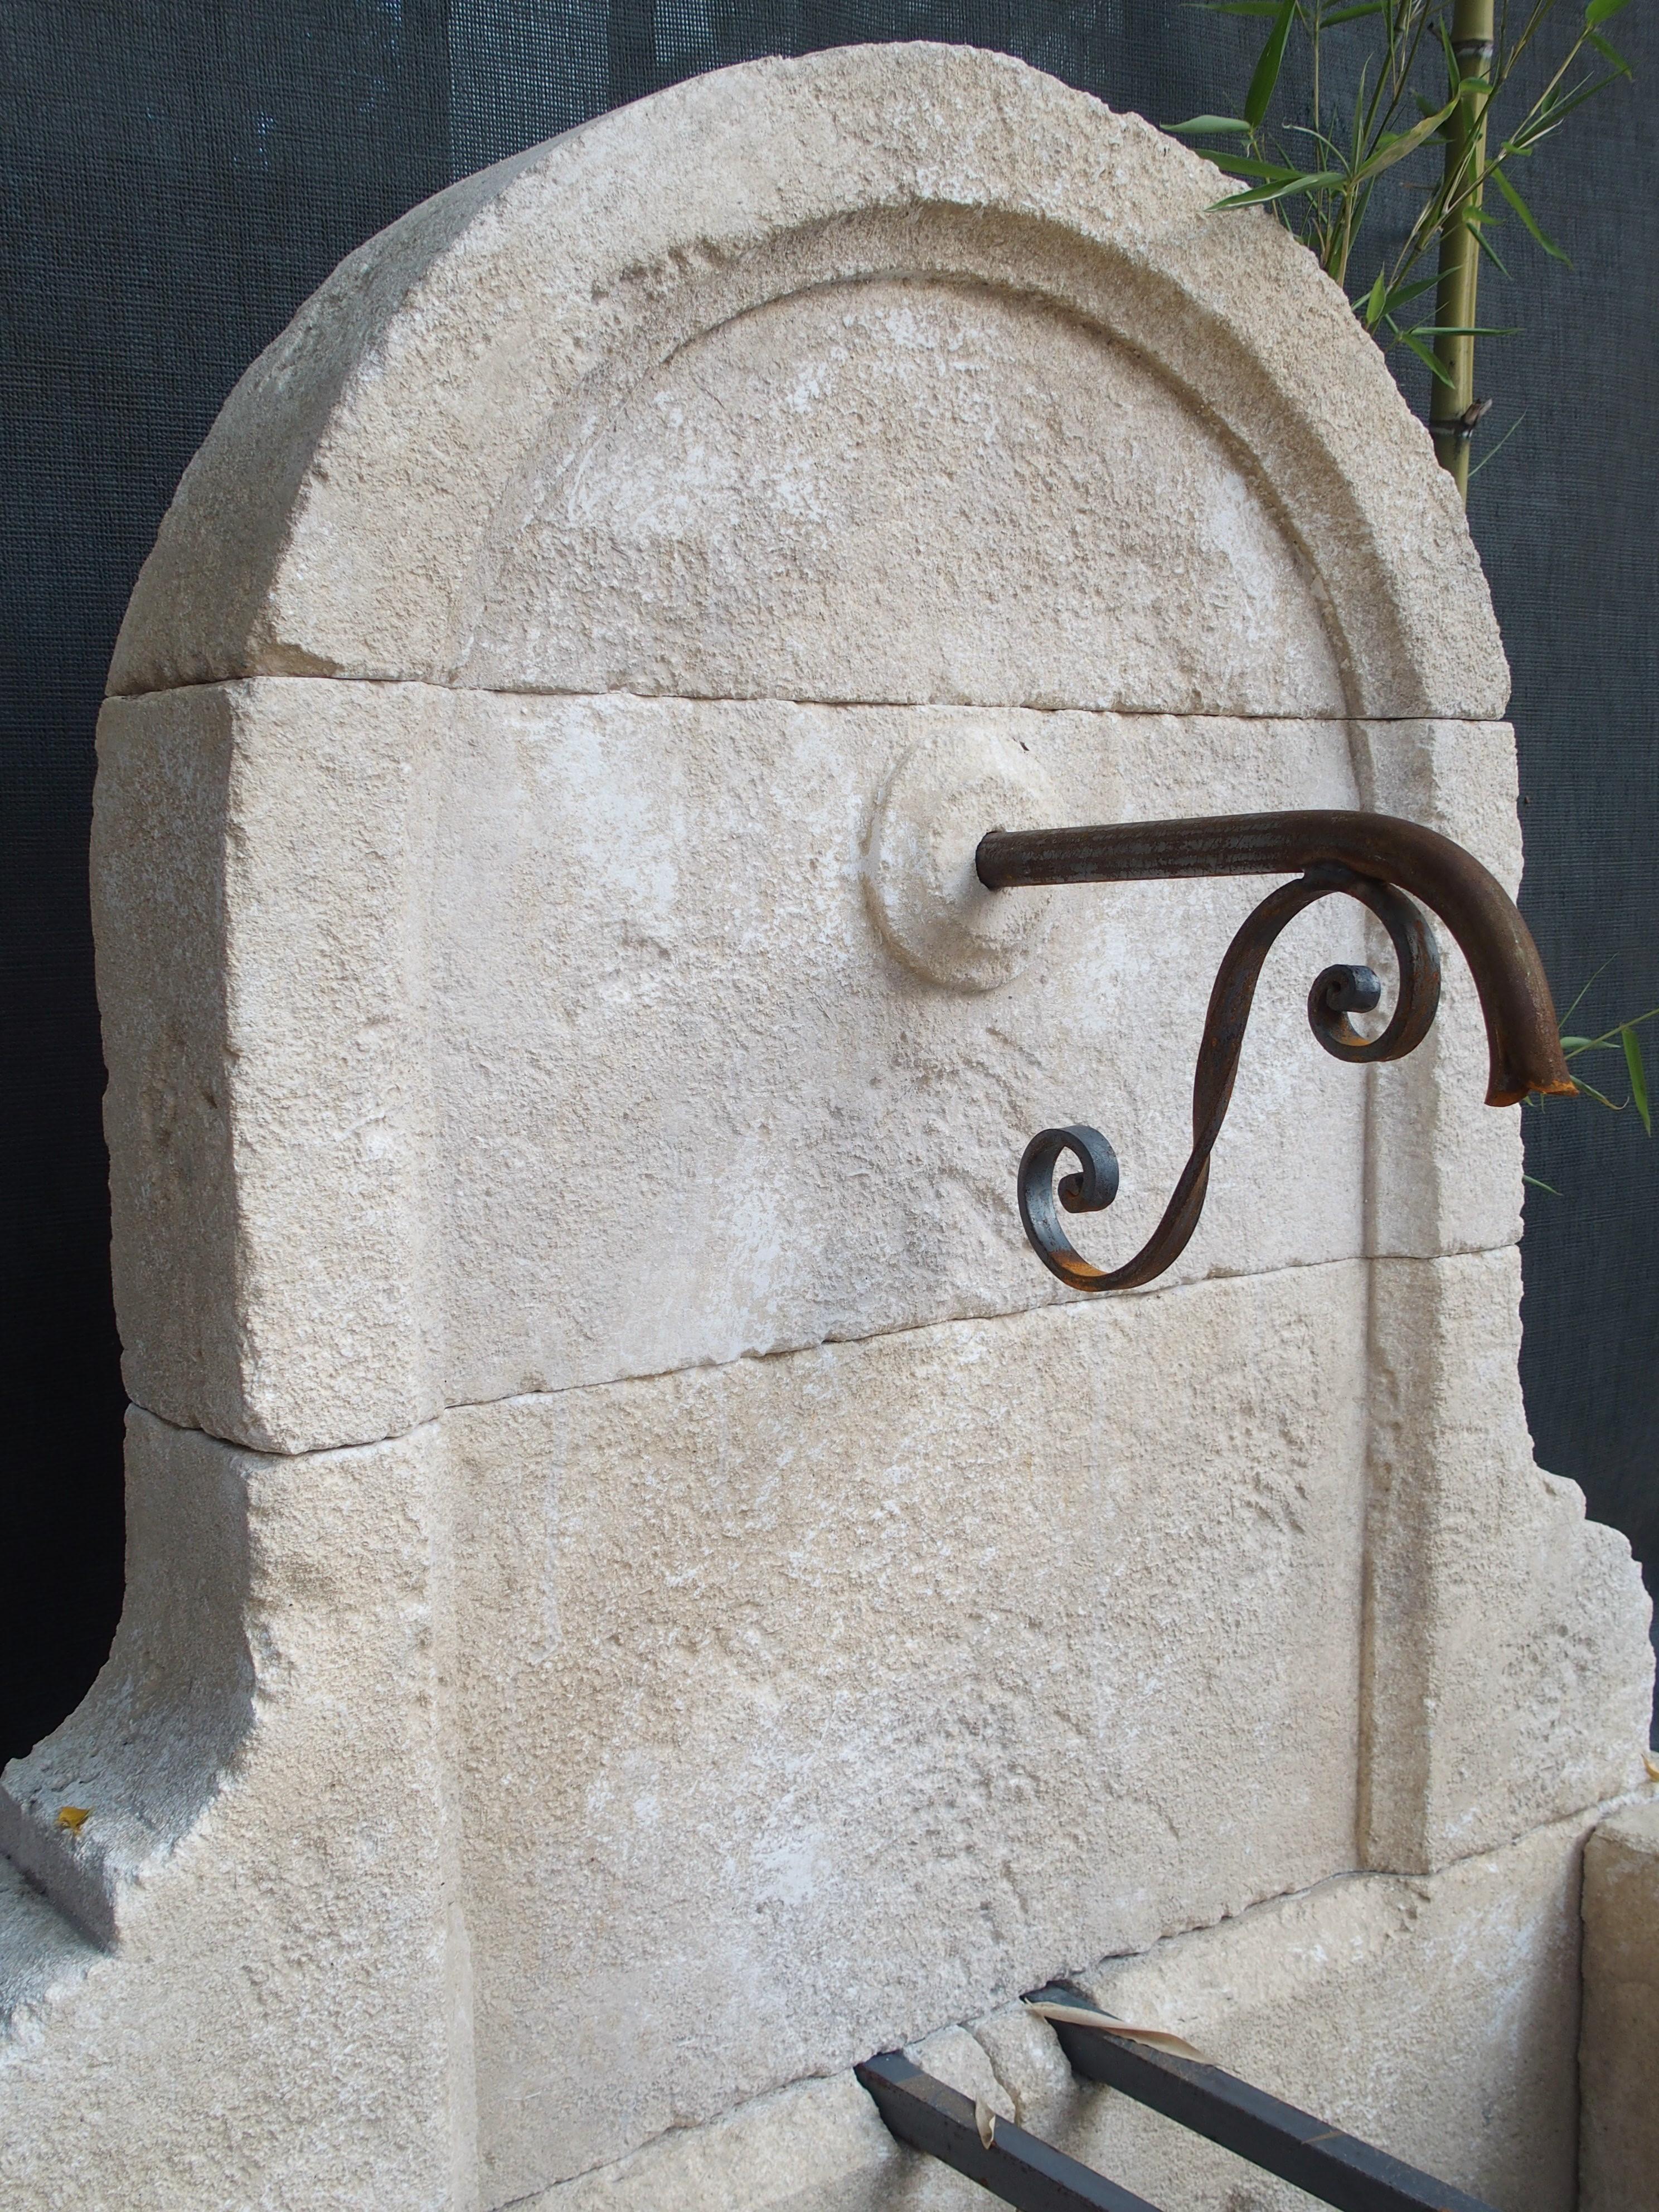 From Provence, this small arched limestone wall fountain has a curved and stepped-in molded back. It has a cast iron spout with an iron S-scroll, and the basin is rectangular with a galbe, or slightly out-curved center block at the front. Two iron